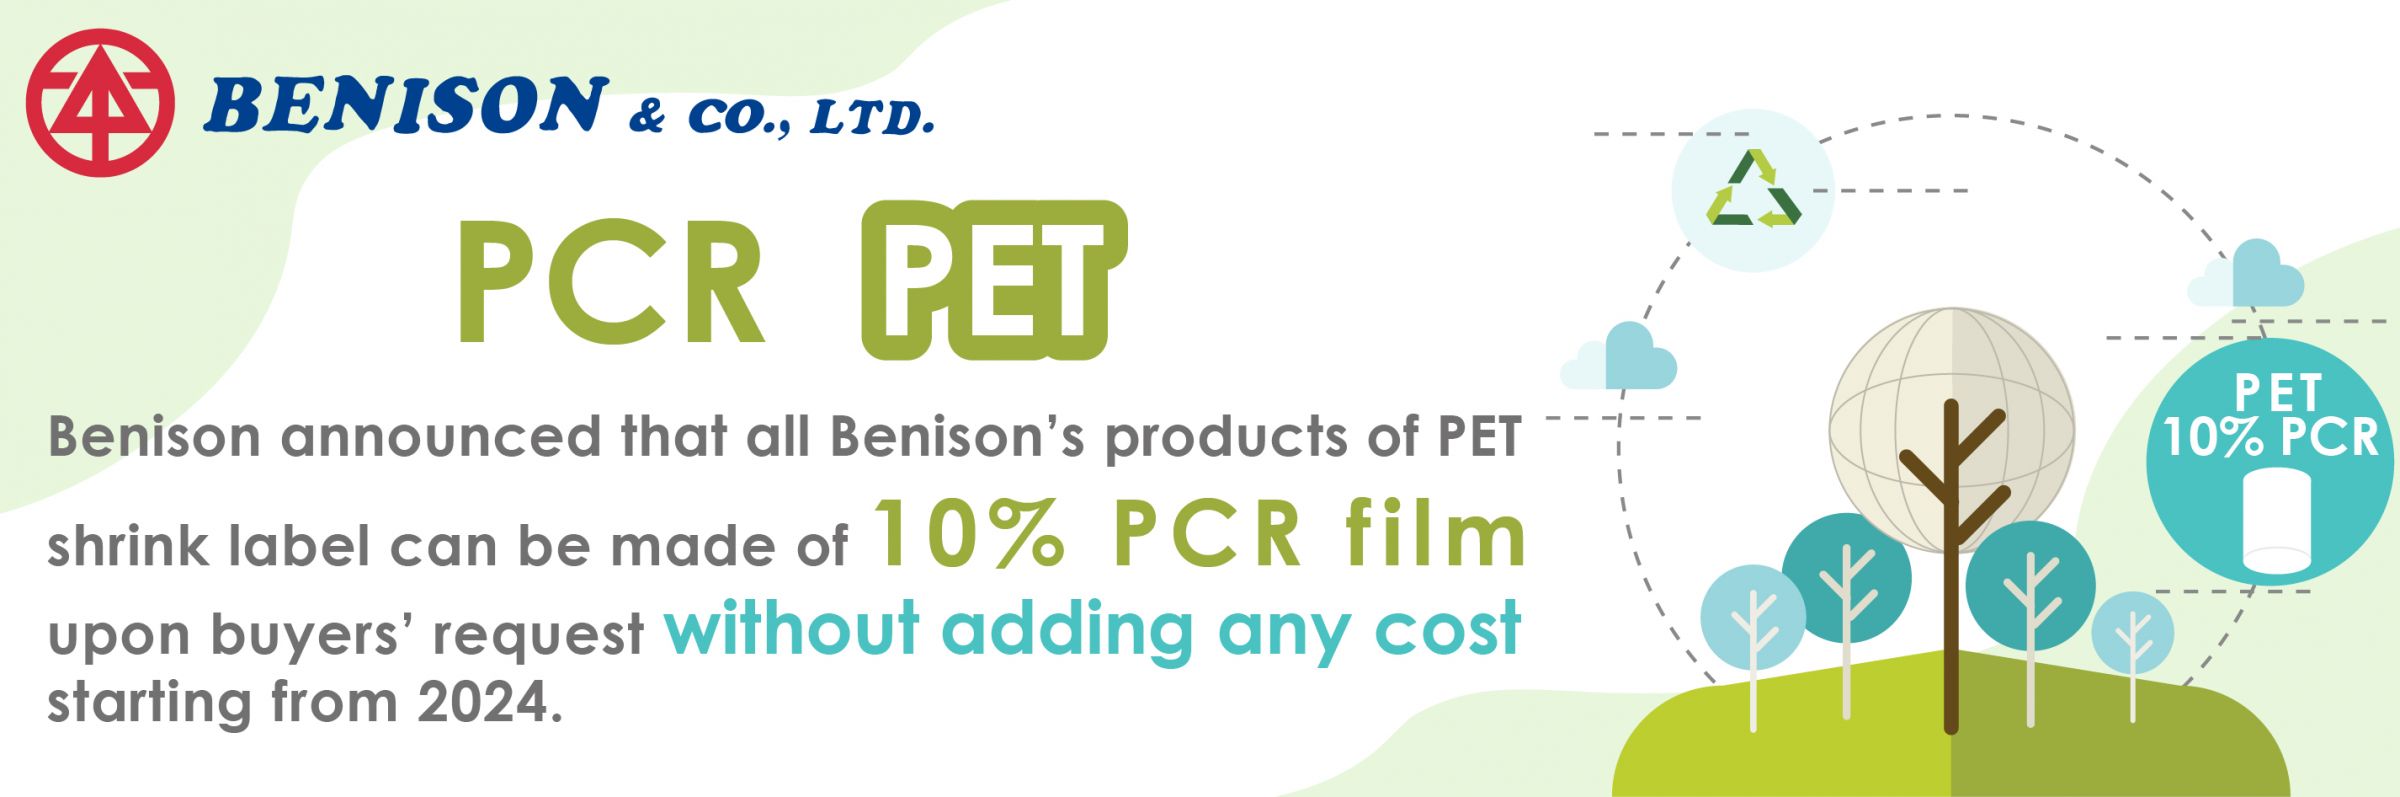 For environmental friendly issue, all series of Benison’s PET shrink labels will be made of at least 10% PCR starting from 2024!